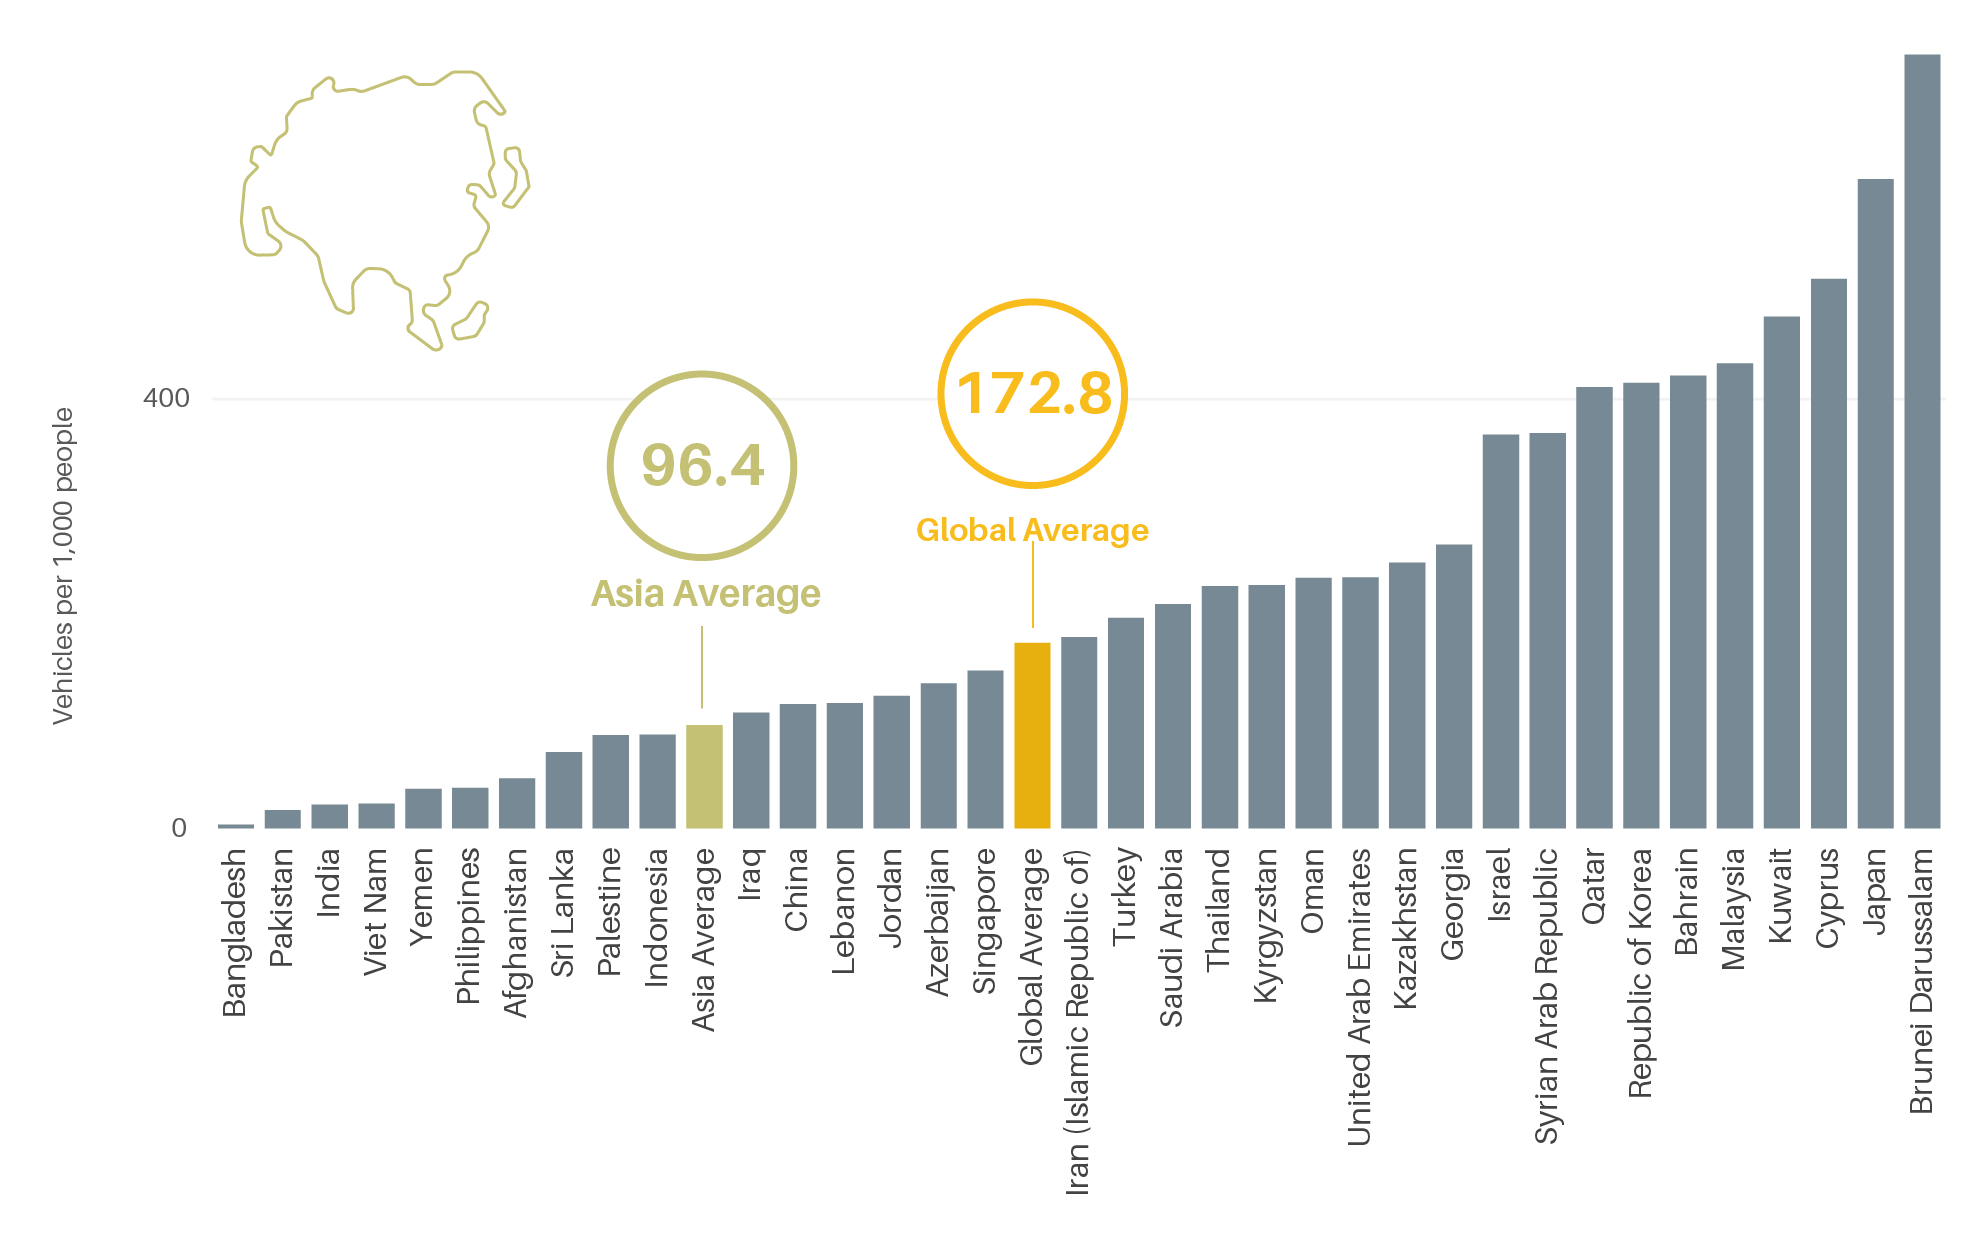  Car ownership rates per 1,000 people in Asia, 2015